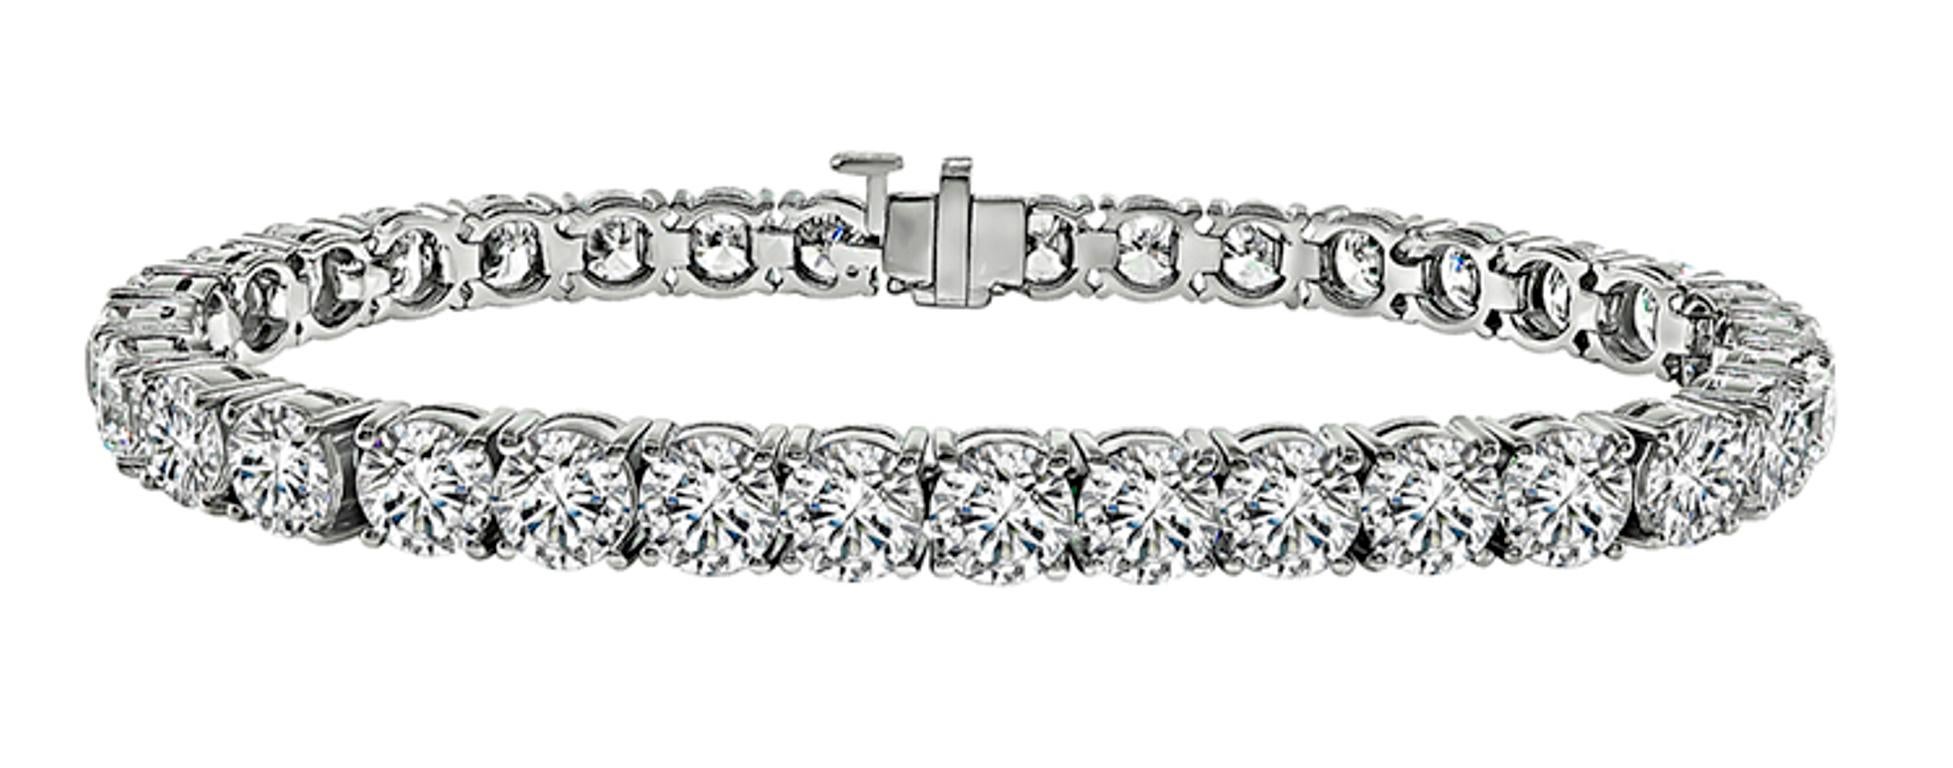 This one-of-a kind 18k white gold tennis bracelet features sparkling GIA certified round cut diamonds that weigh 17.54ct. The color of the diamonds is graded from E-G with SI-SI2 clarity. A copy of the certificates is available upon req uest. The